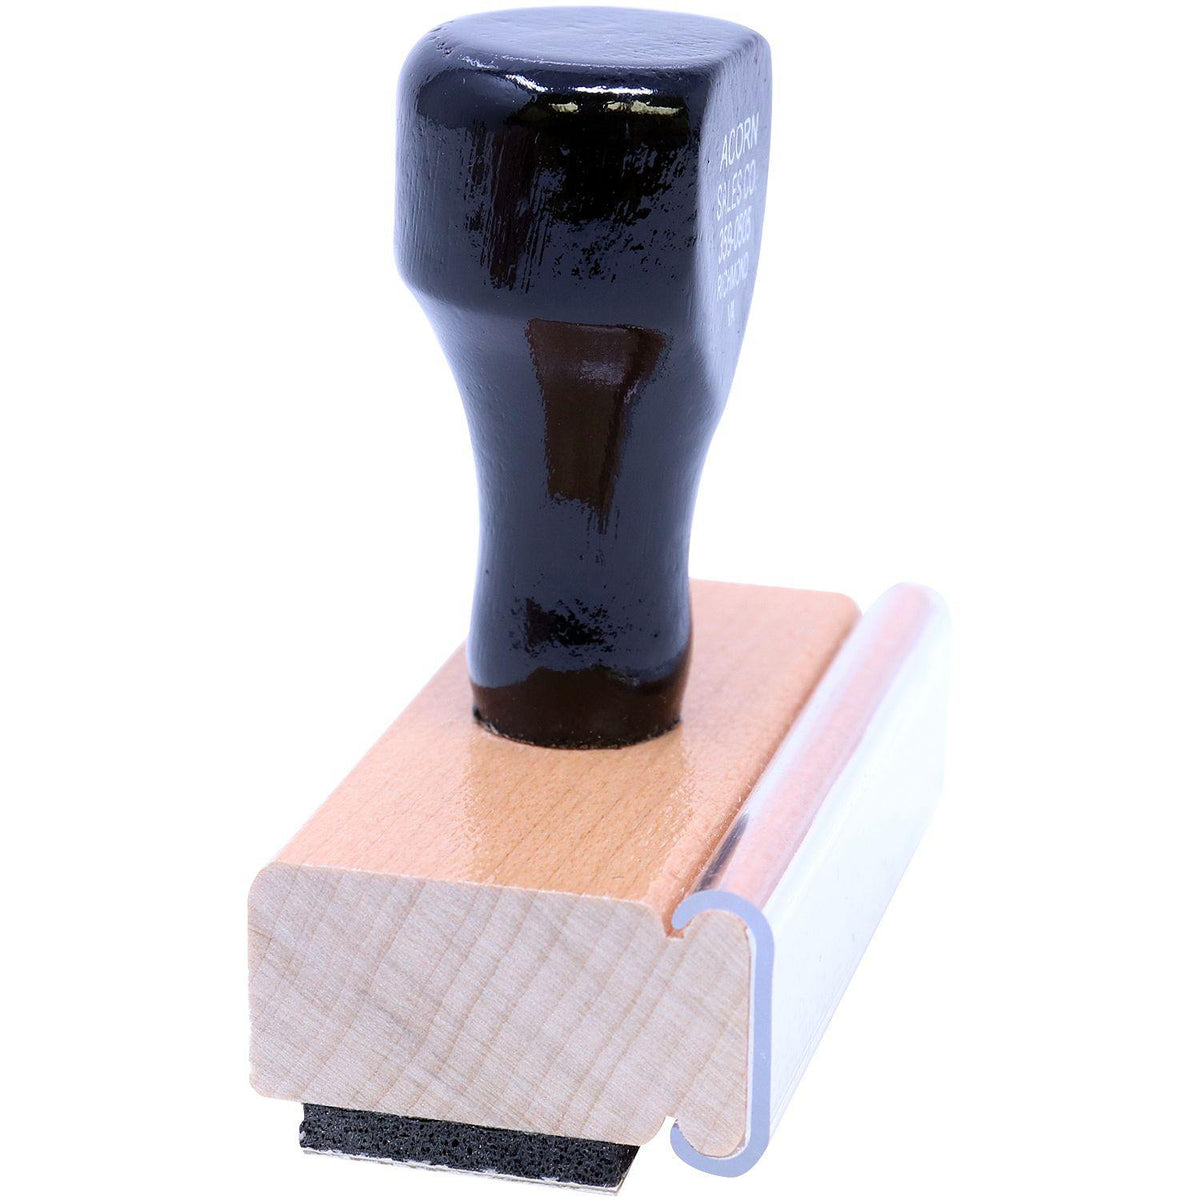 Side View of Large Global Air Letter Post Rubber Stamp at an Angle